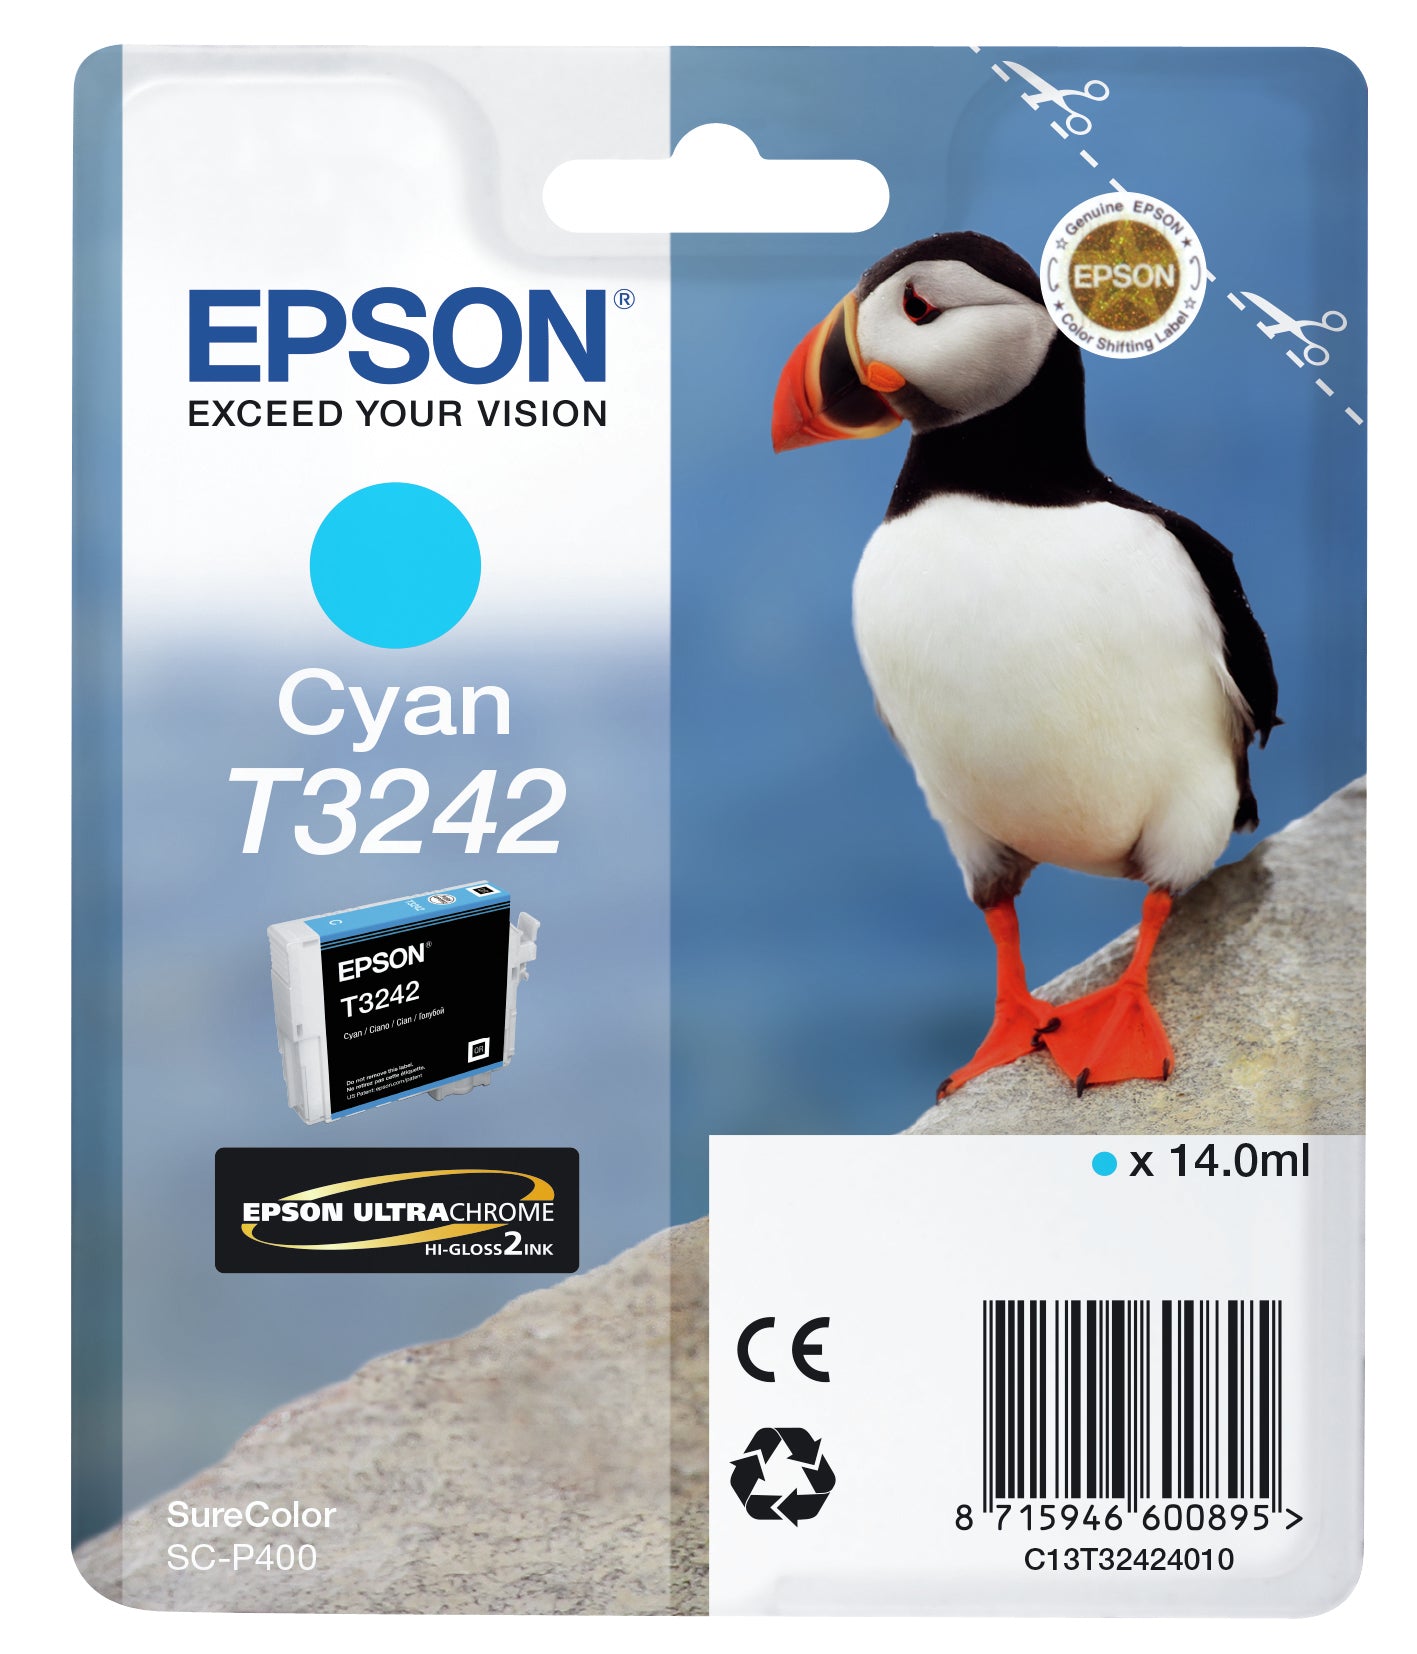 Epson C13T32424010/T3242 Ink cartridge cyan, 980 pages 14ml for Epson SC-P 400